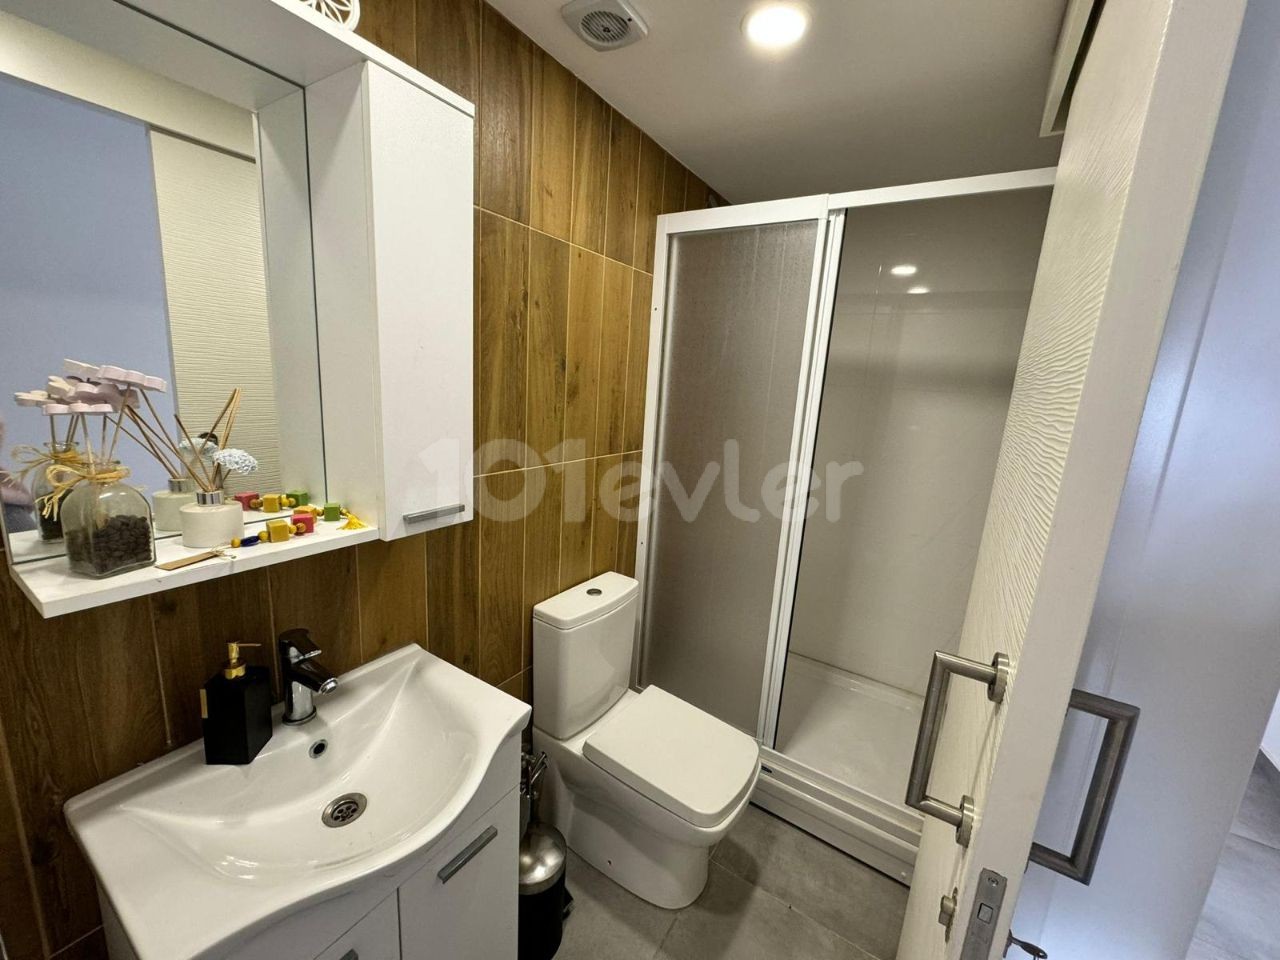 2+1 LARGE FLAT WITH ENSURE BATHROOM AND CLOSET ROOM FOR SALE IN GONYELI